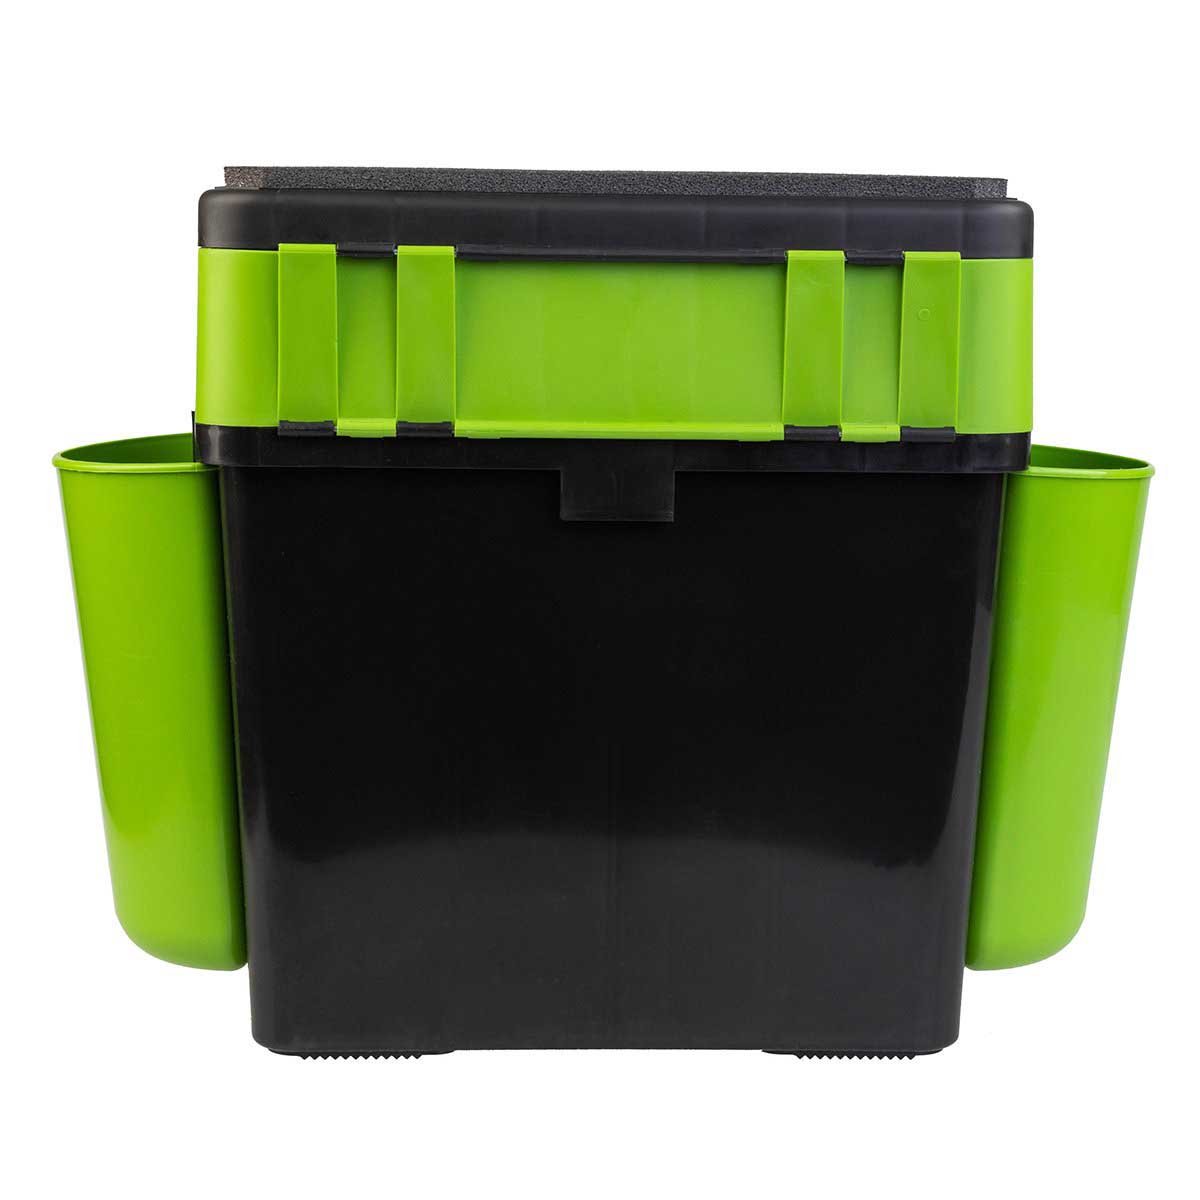 FishBox Large 5 gal Box for Ice Fishing, 2 Compartments